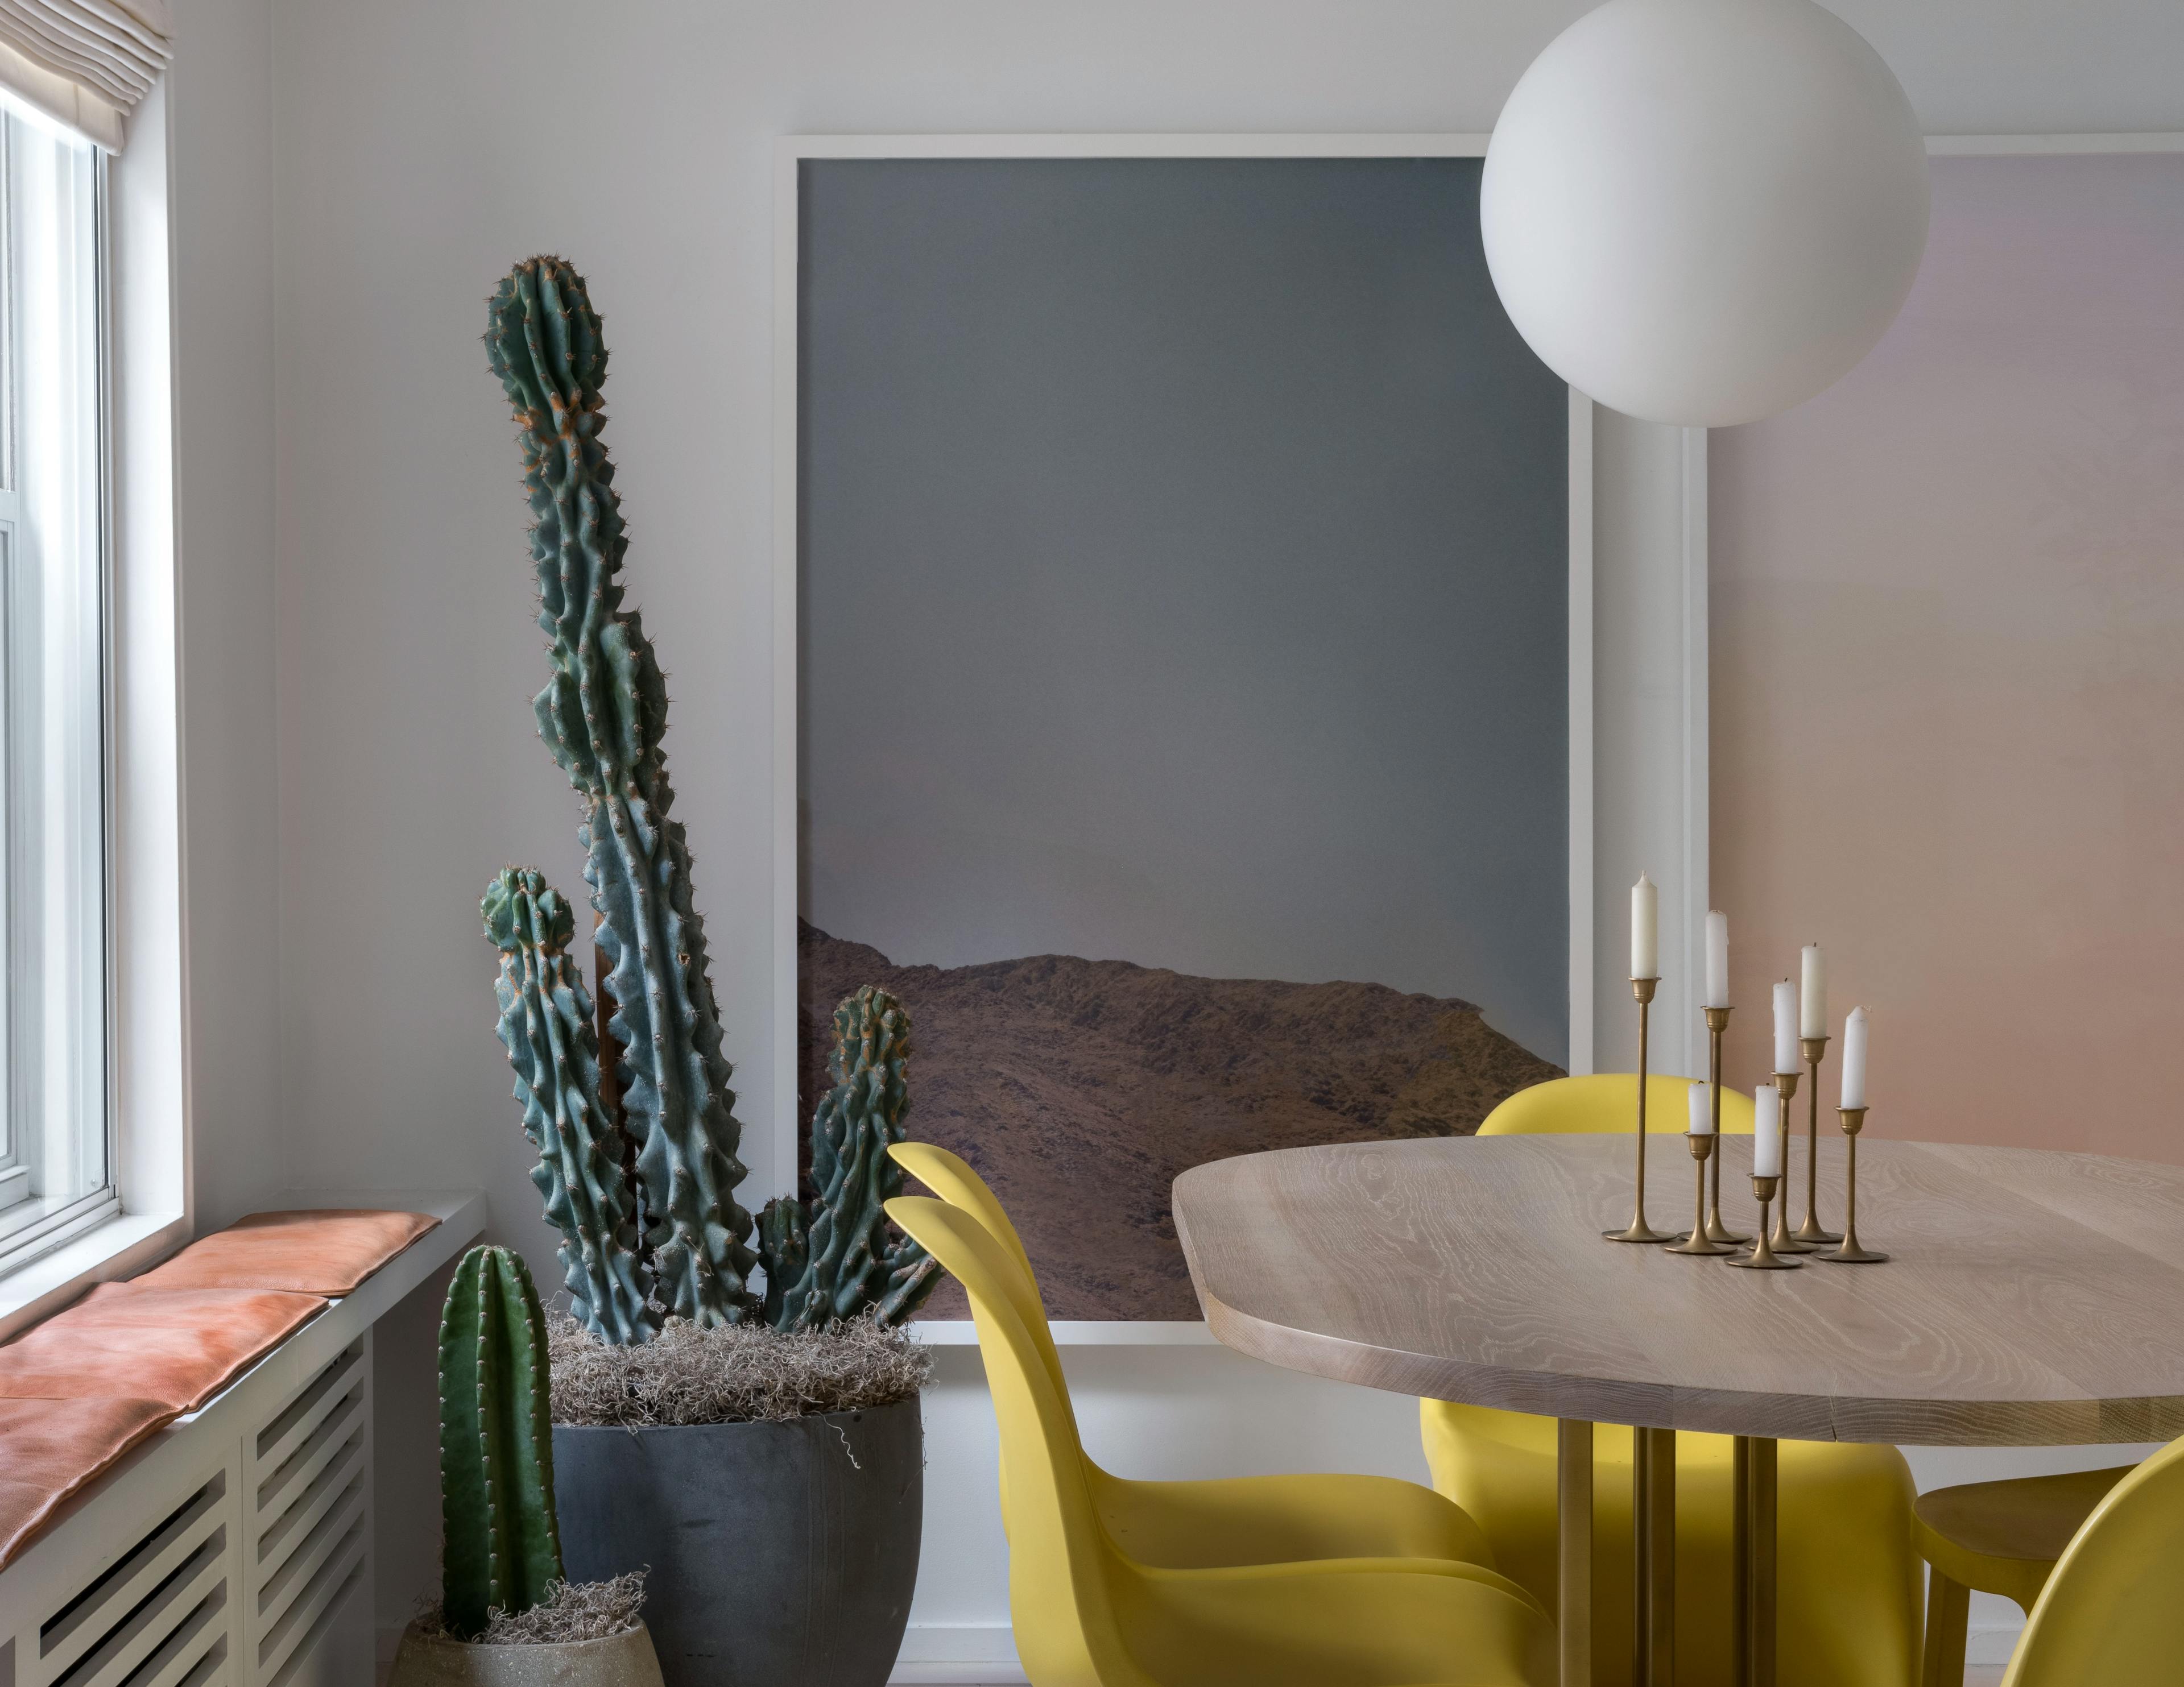 A large framed photograph of a mountain landscape by artist Jordan Sullivan on a white wall next to a cactus plant and behind a circular kitchen table with yellow chairs.